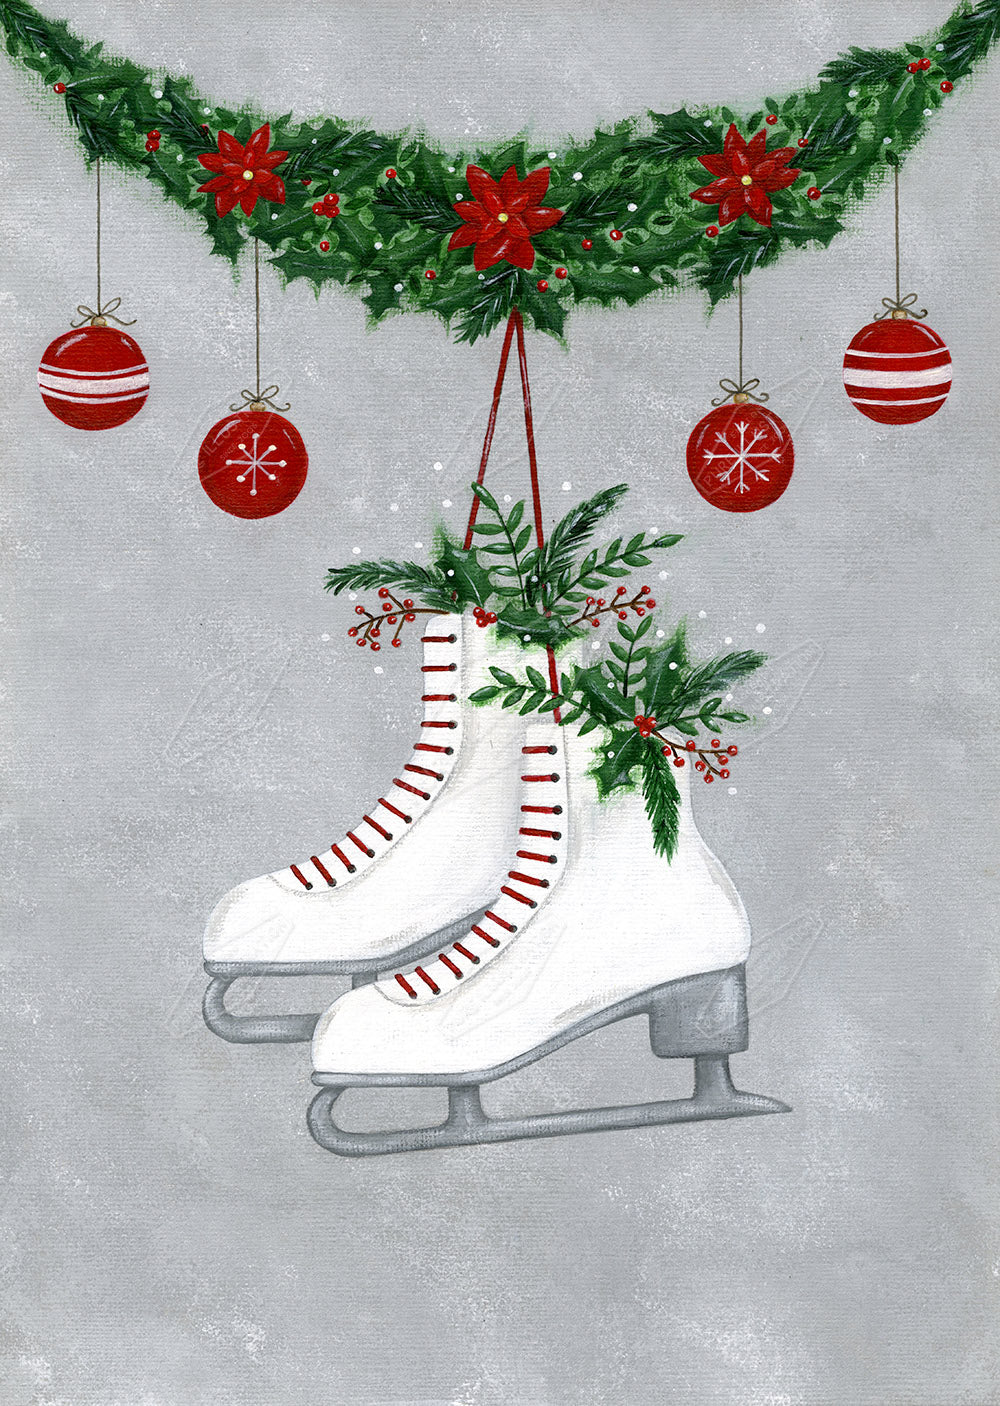 00028104AAI - Christmas Ice Skate Greeting Card Design by Anna Aitken - Pure Art Licensing Agency